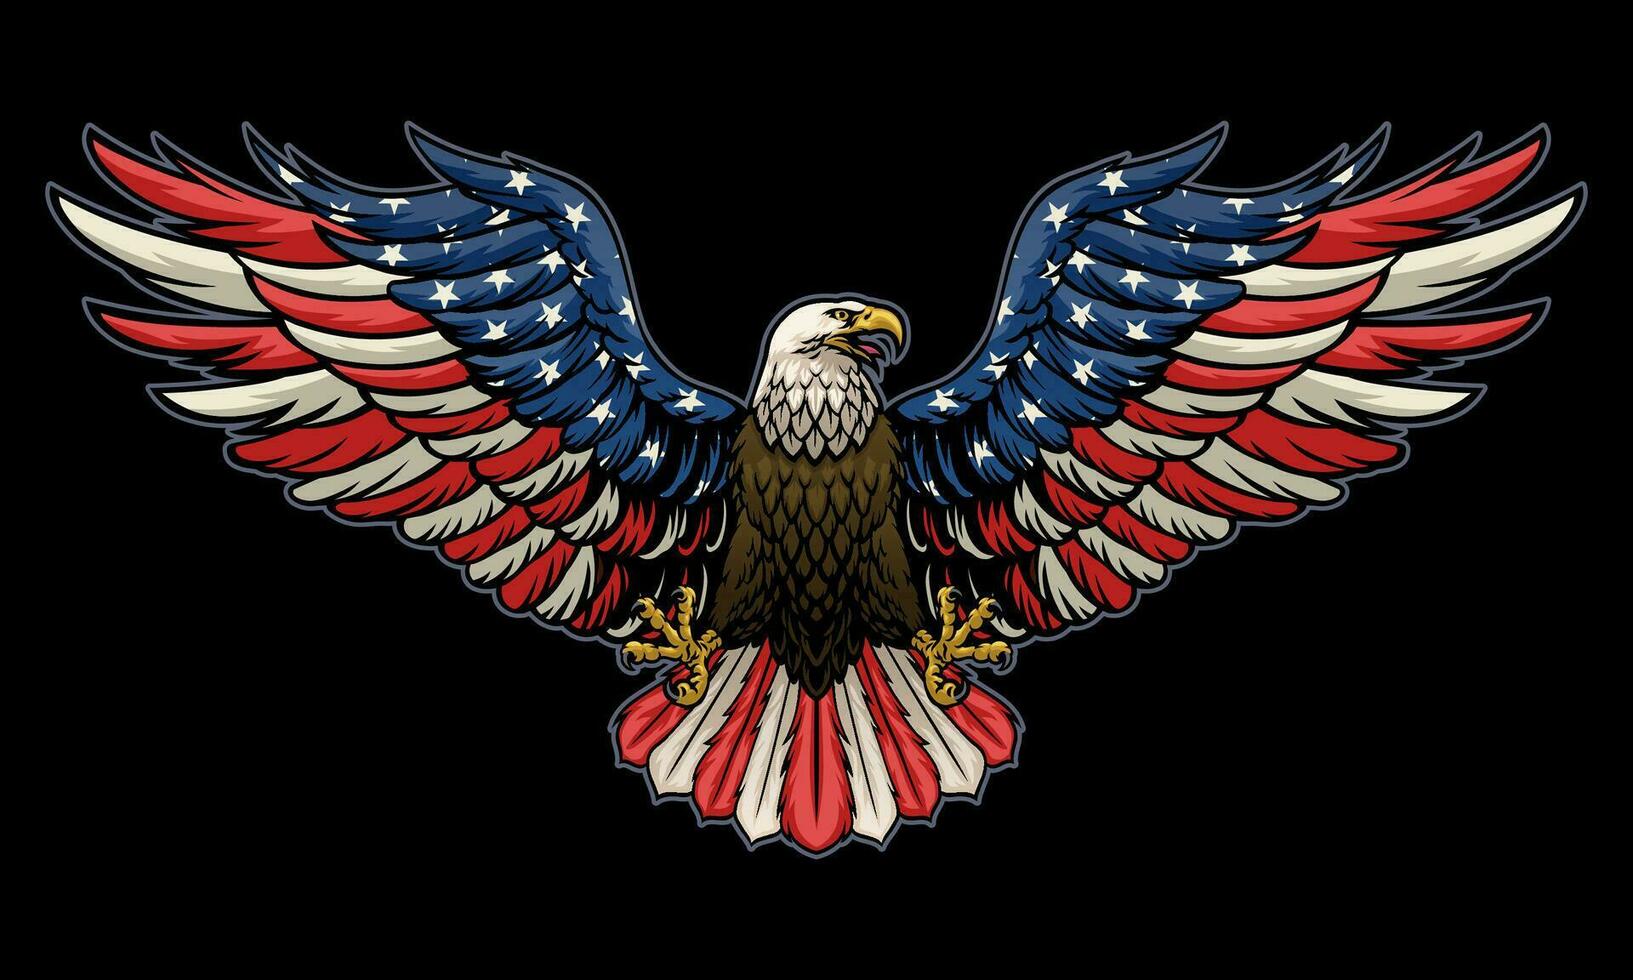 Fierce Bald Eagle Spread the Wings with American Flag Color vector